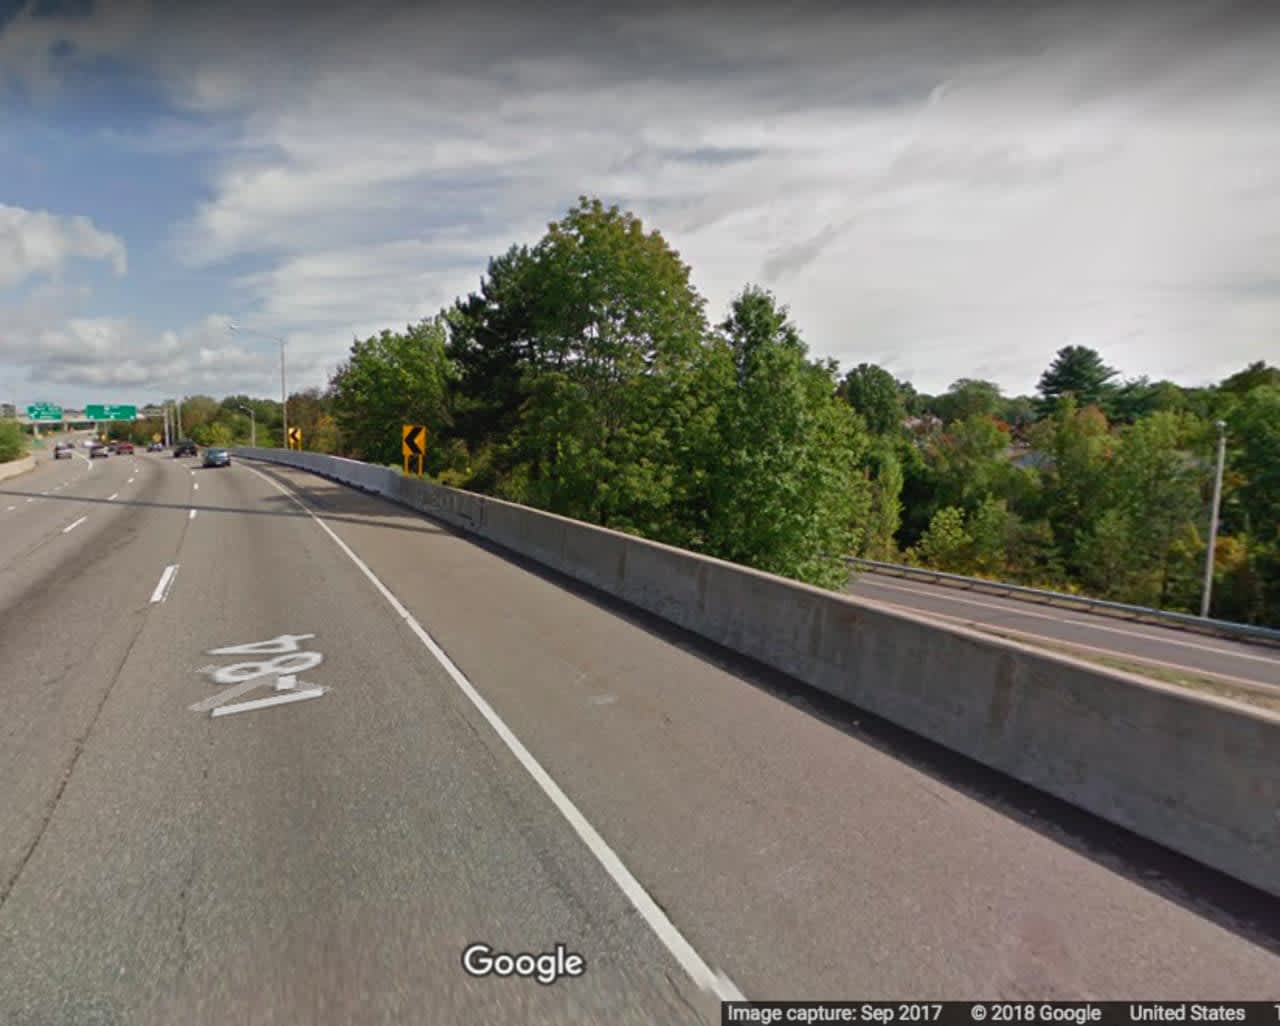 The area of I-84 where the road-rage incident and shooting occurred.